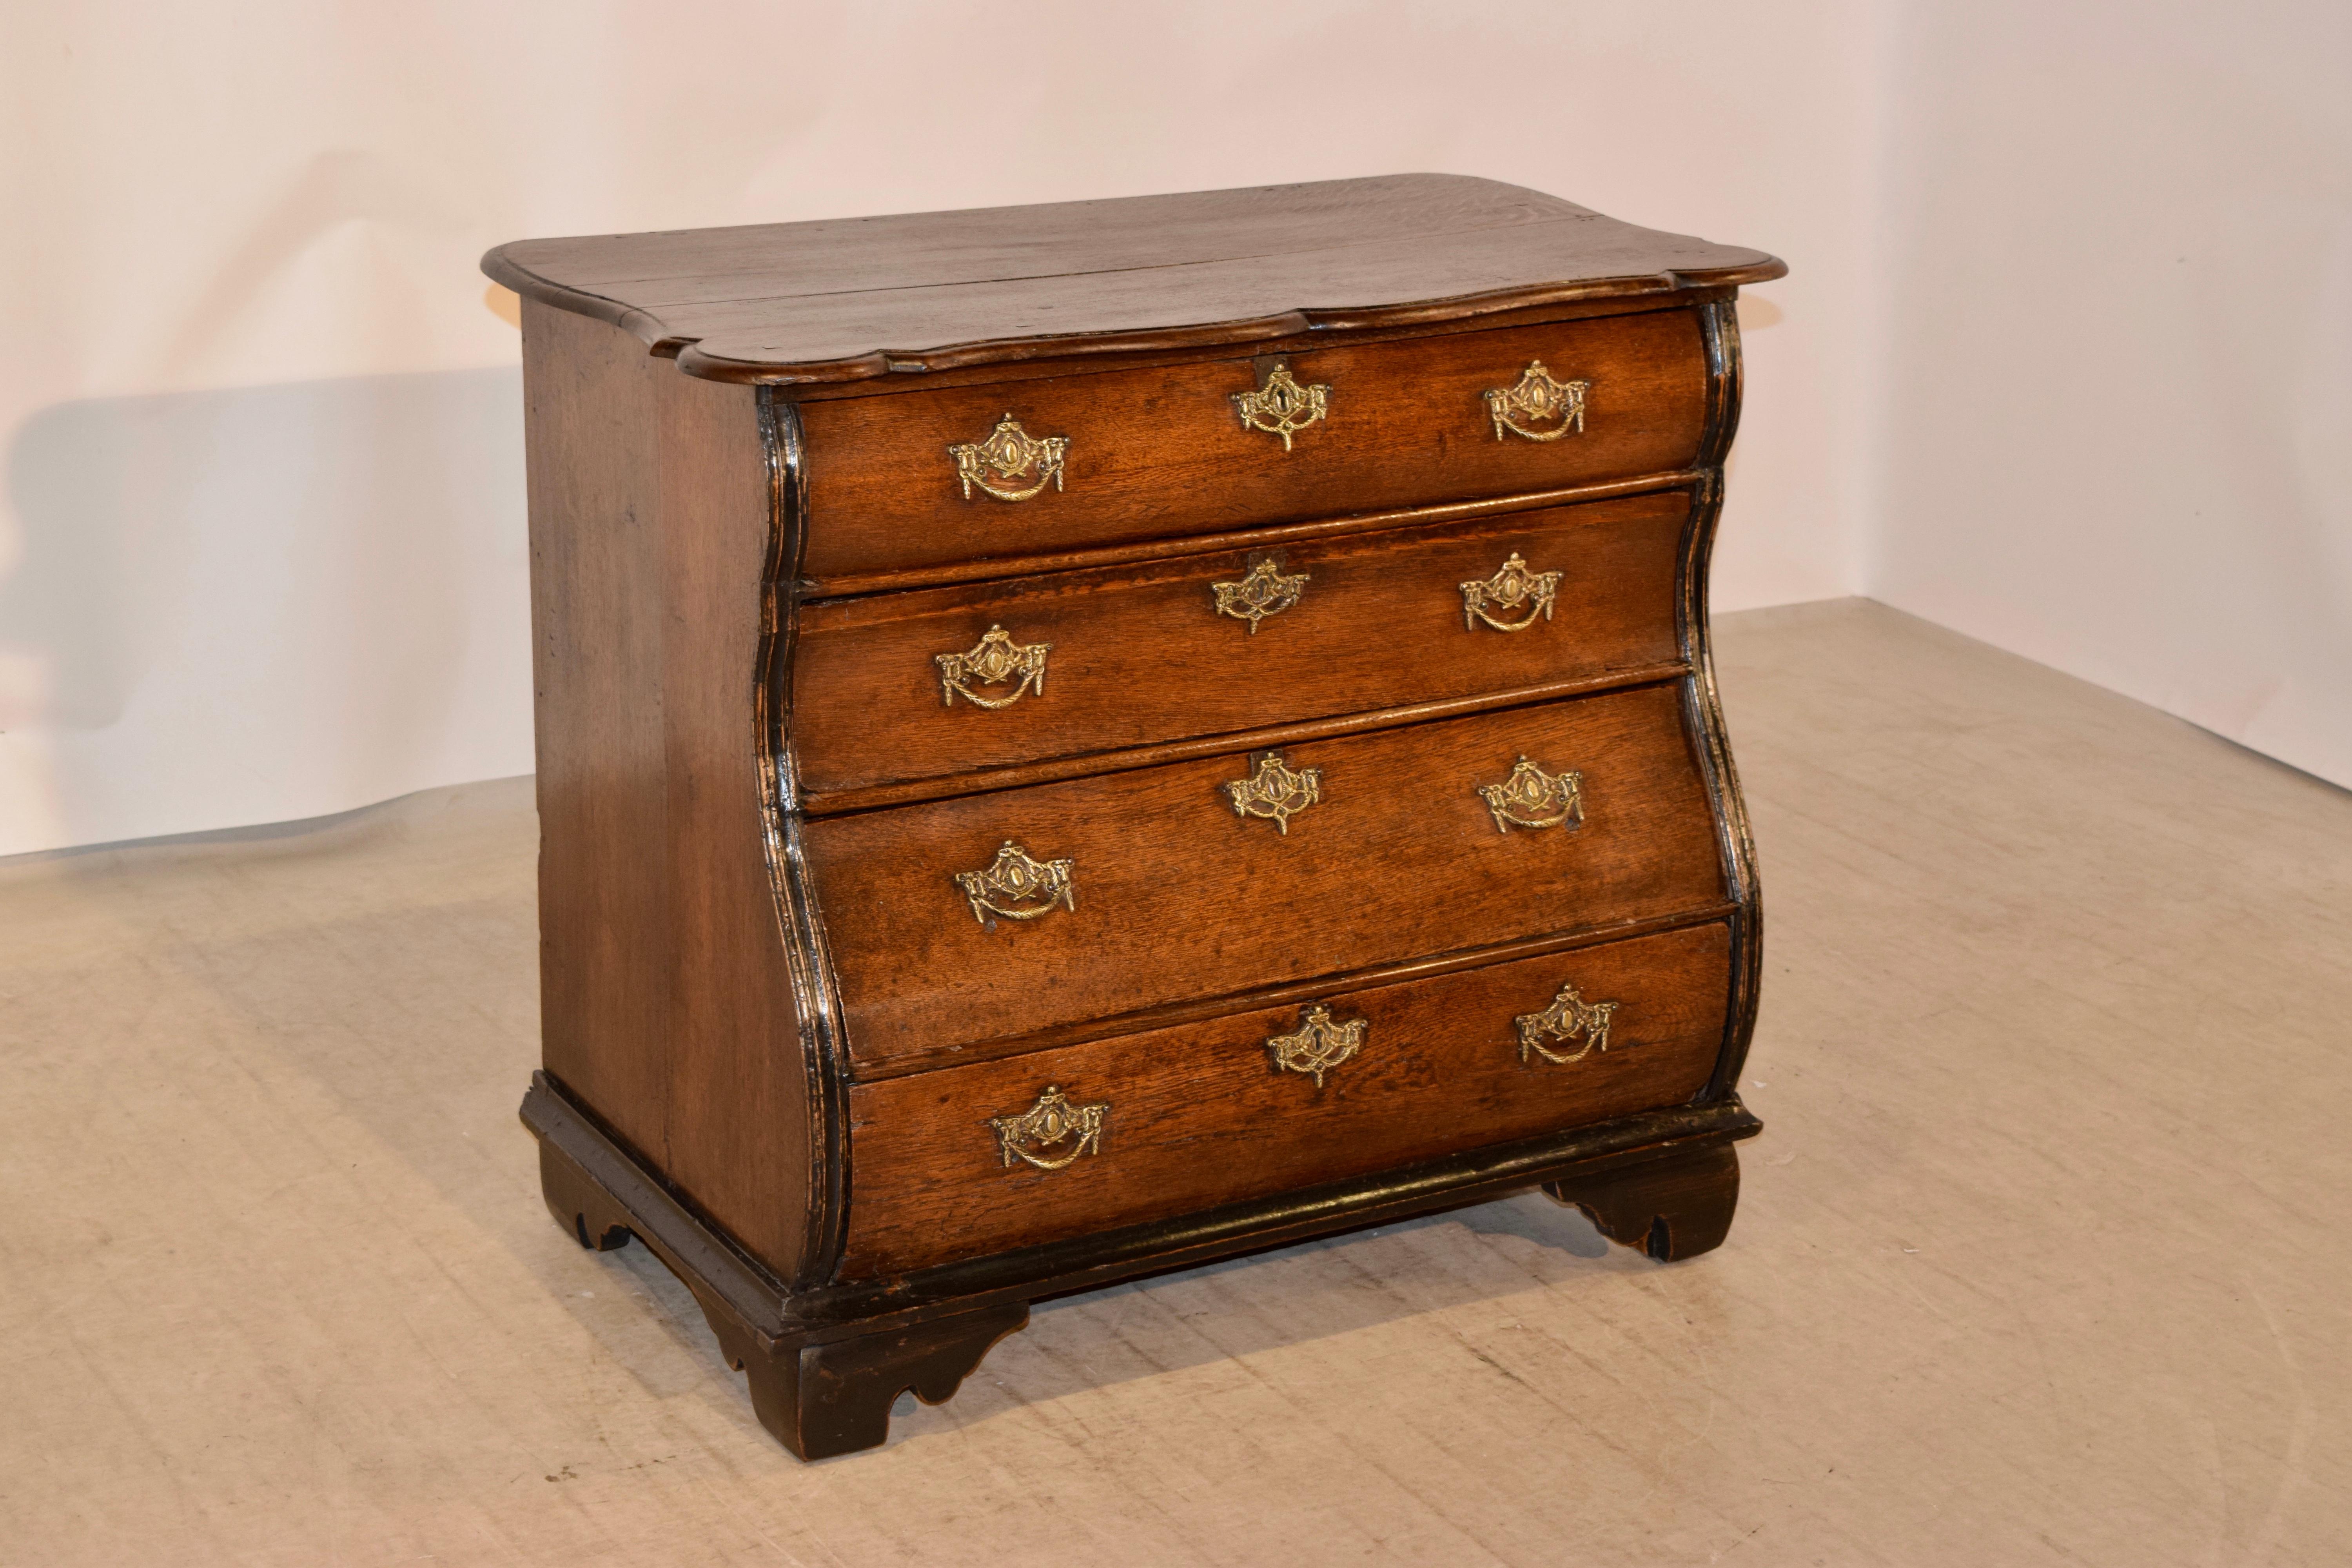 18th century Dutch bombe chest of drawers made from oak. The top has a scalloped edge, which is also beveled, following down to a serpentine shaped case with four drawers, also shaped on the drawer fronts and flanked by reeded accents and simple